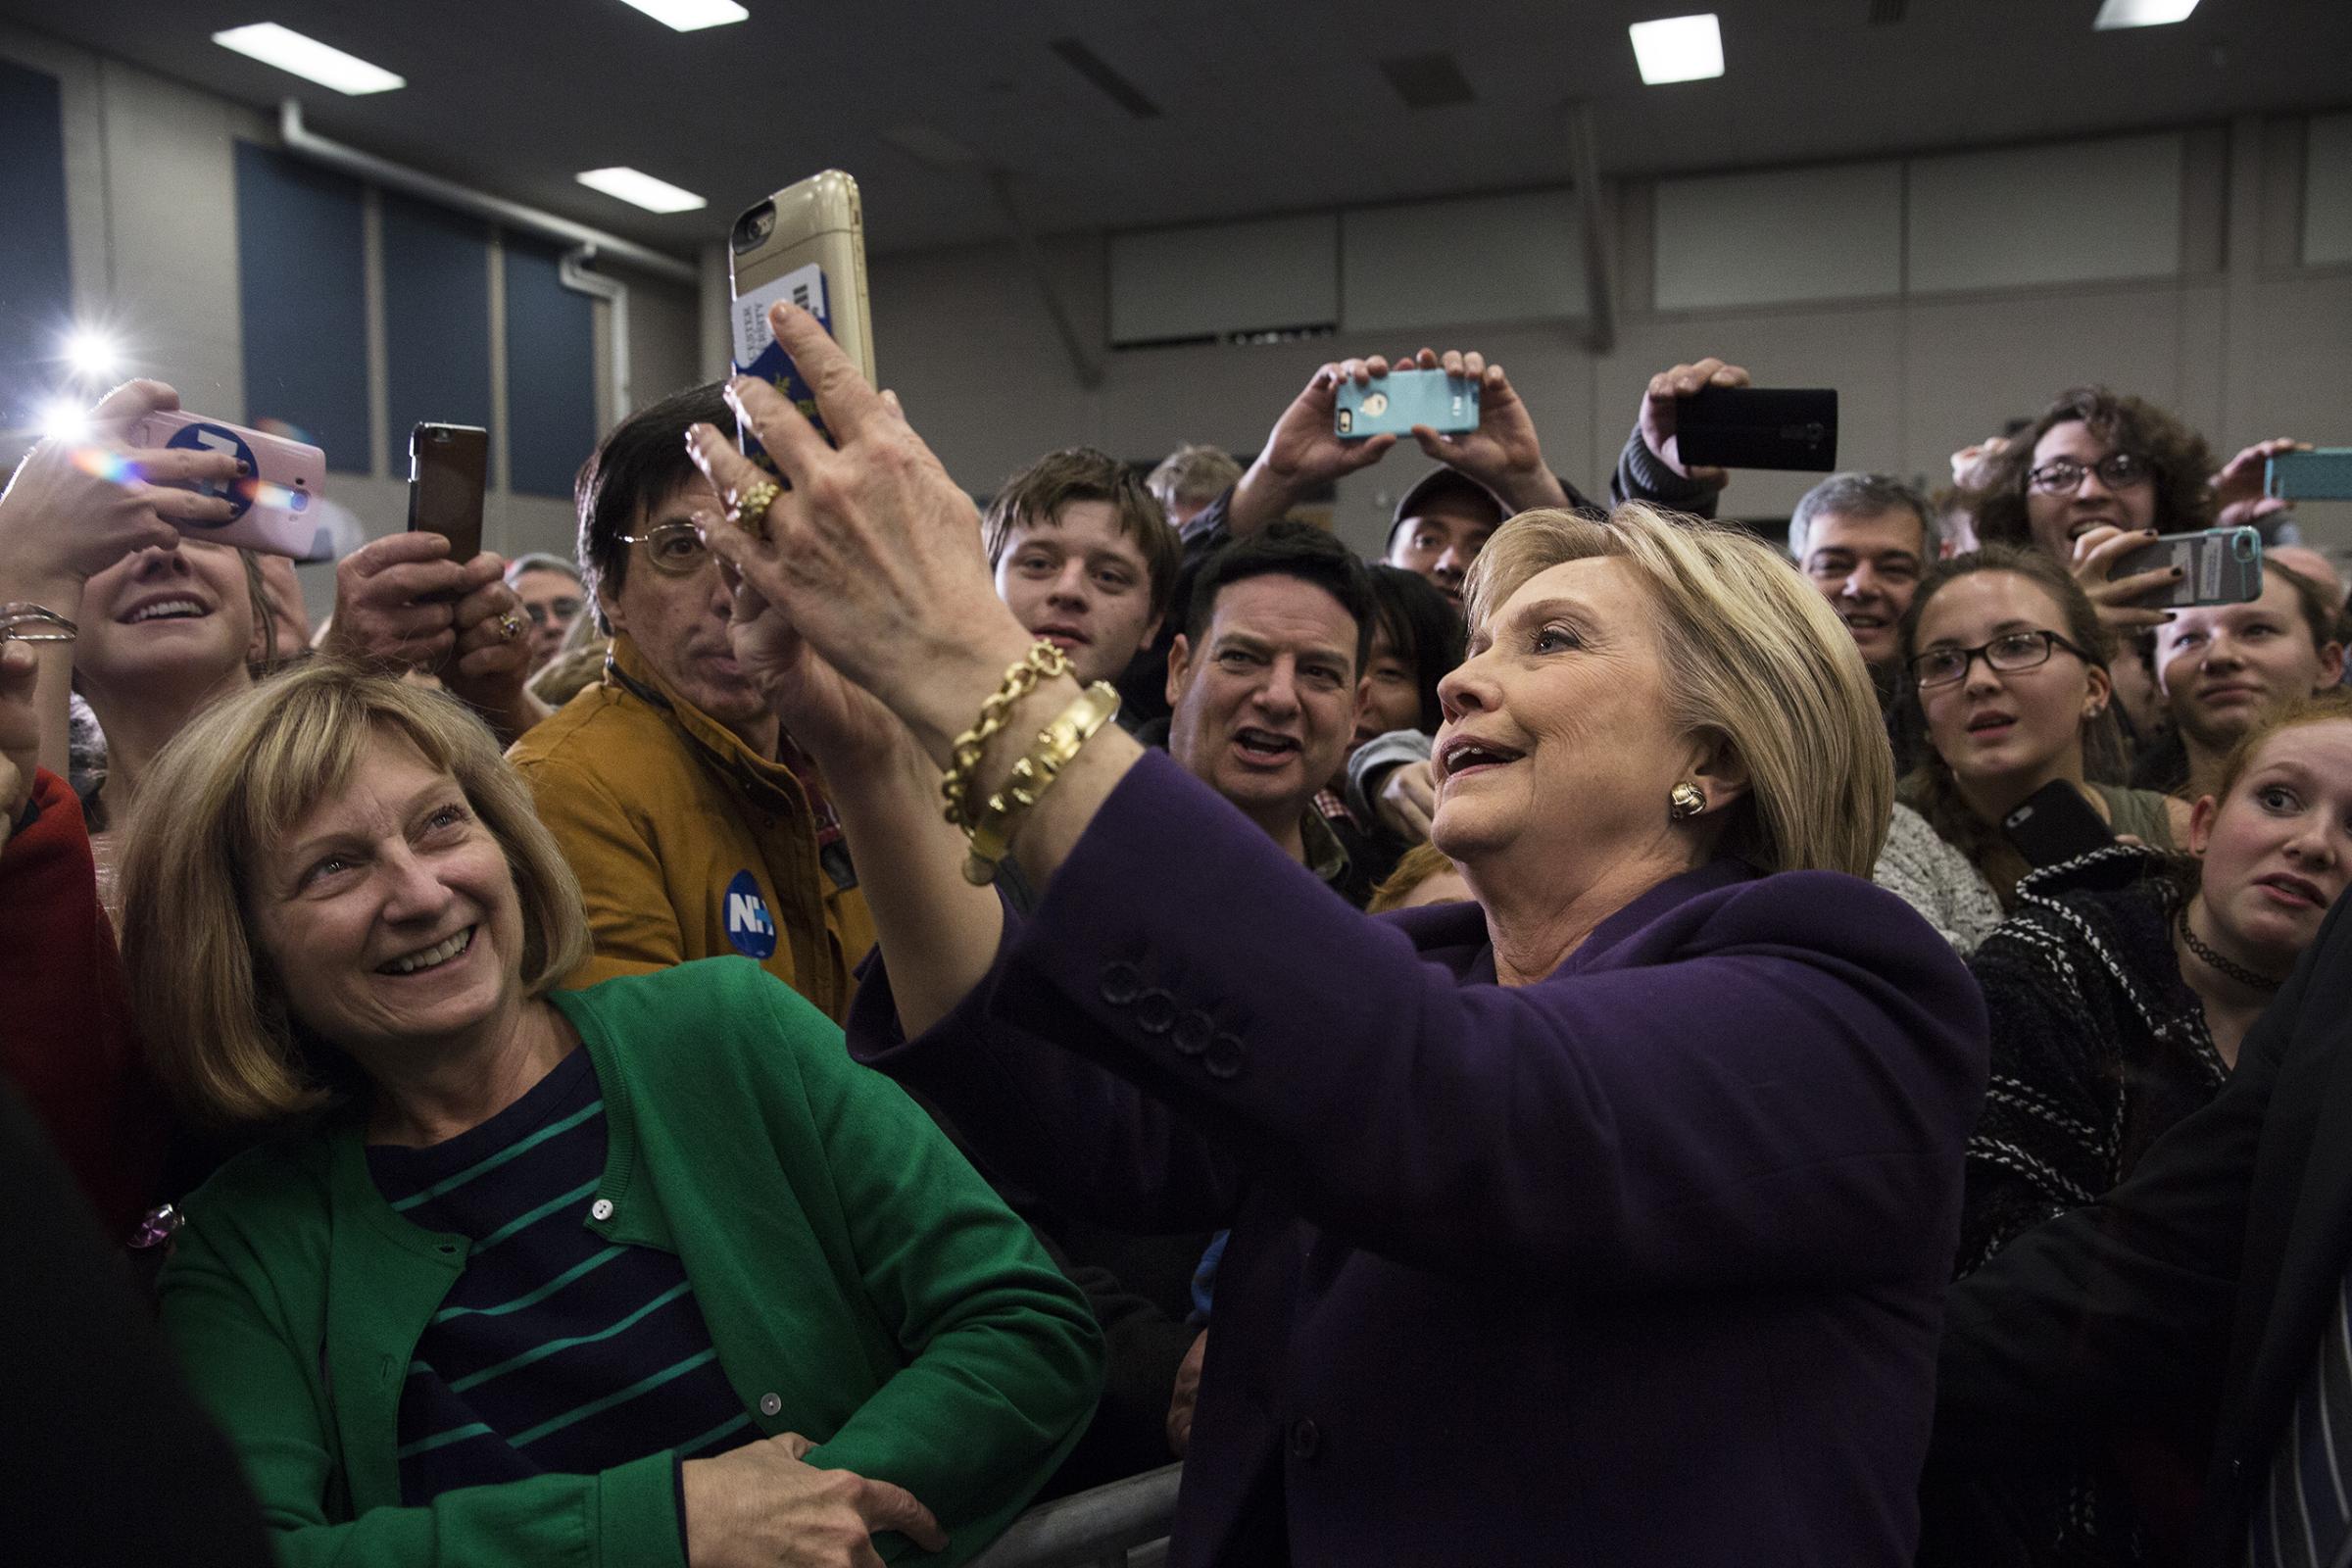 February 2, 2016 - Hampton, New Hampshire, United States: Democratic Presidential candidate, Hillary Clinton engaging in selfies while campaigning with Gabby Giffords and Mark Kelly at Winnacunnet High School. Photograph by James Nachtwey for TIME